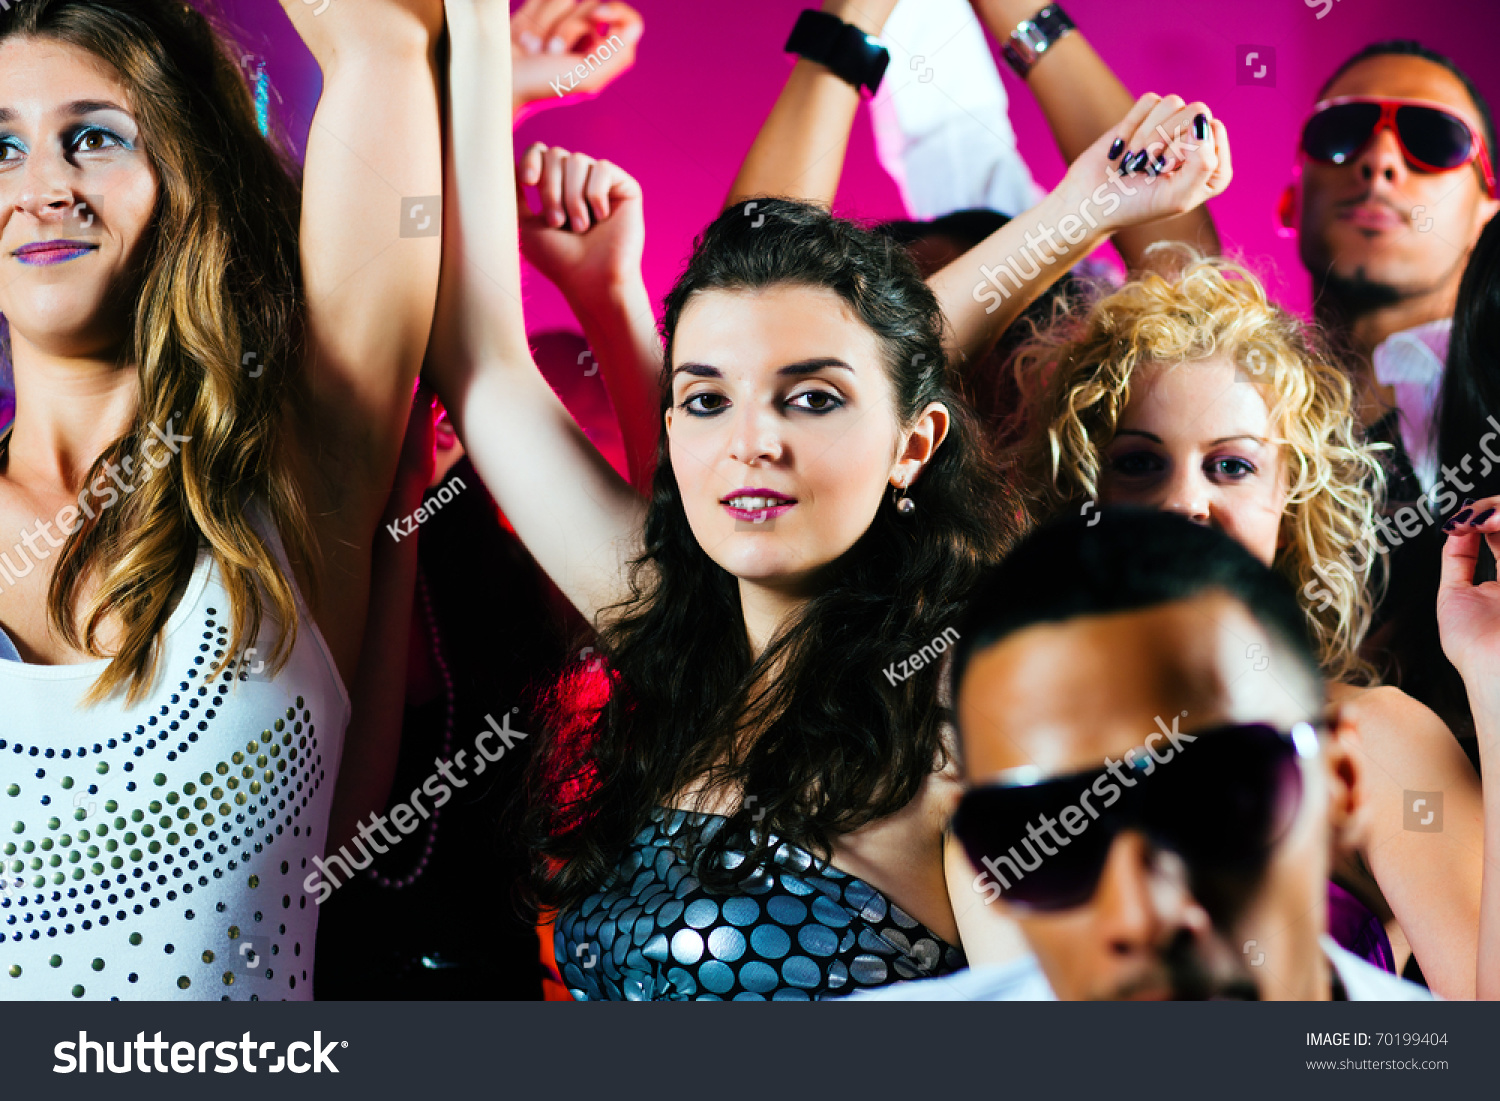 Dance Action Disco Club Group Friends Stock Photo 70199404 - Shutterstock